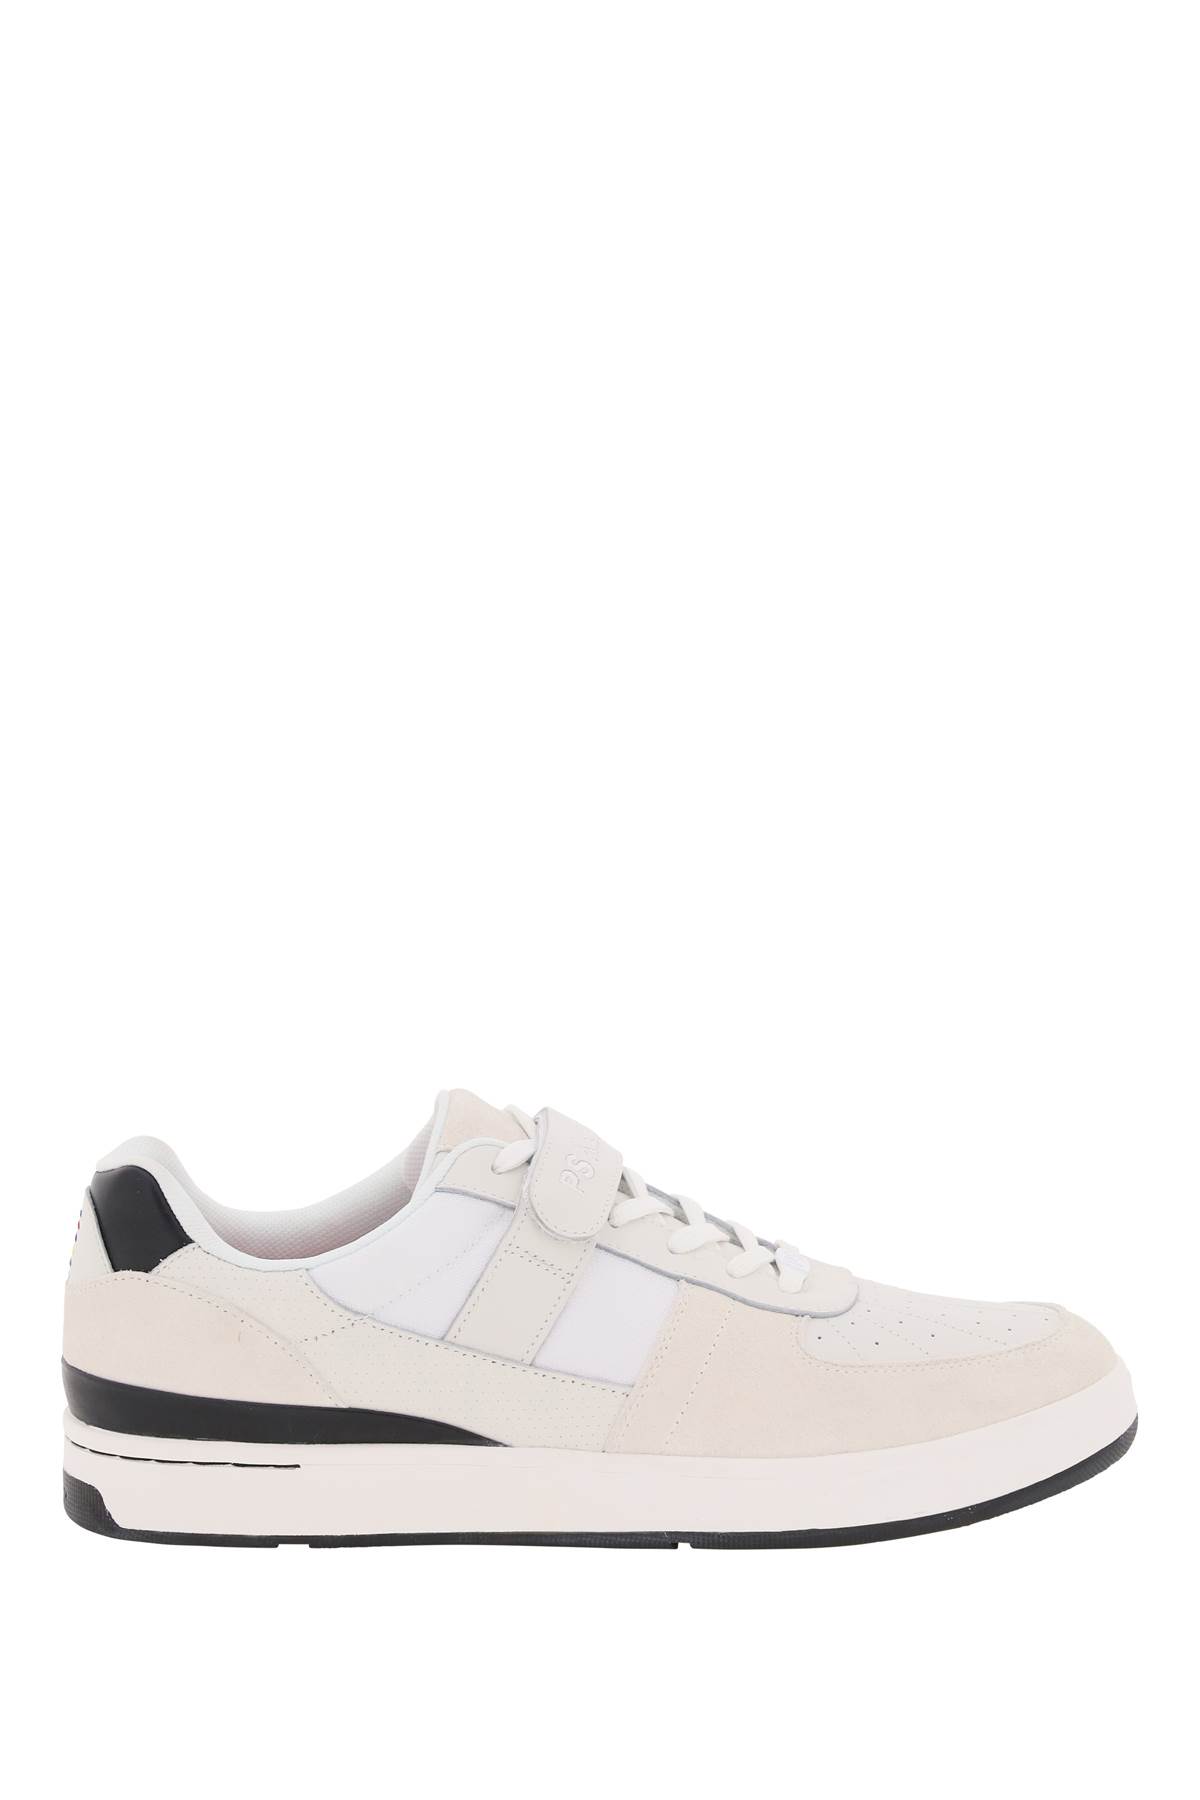 PS by Paul Smith Toledo Sneakers